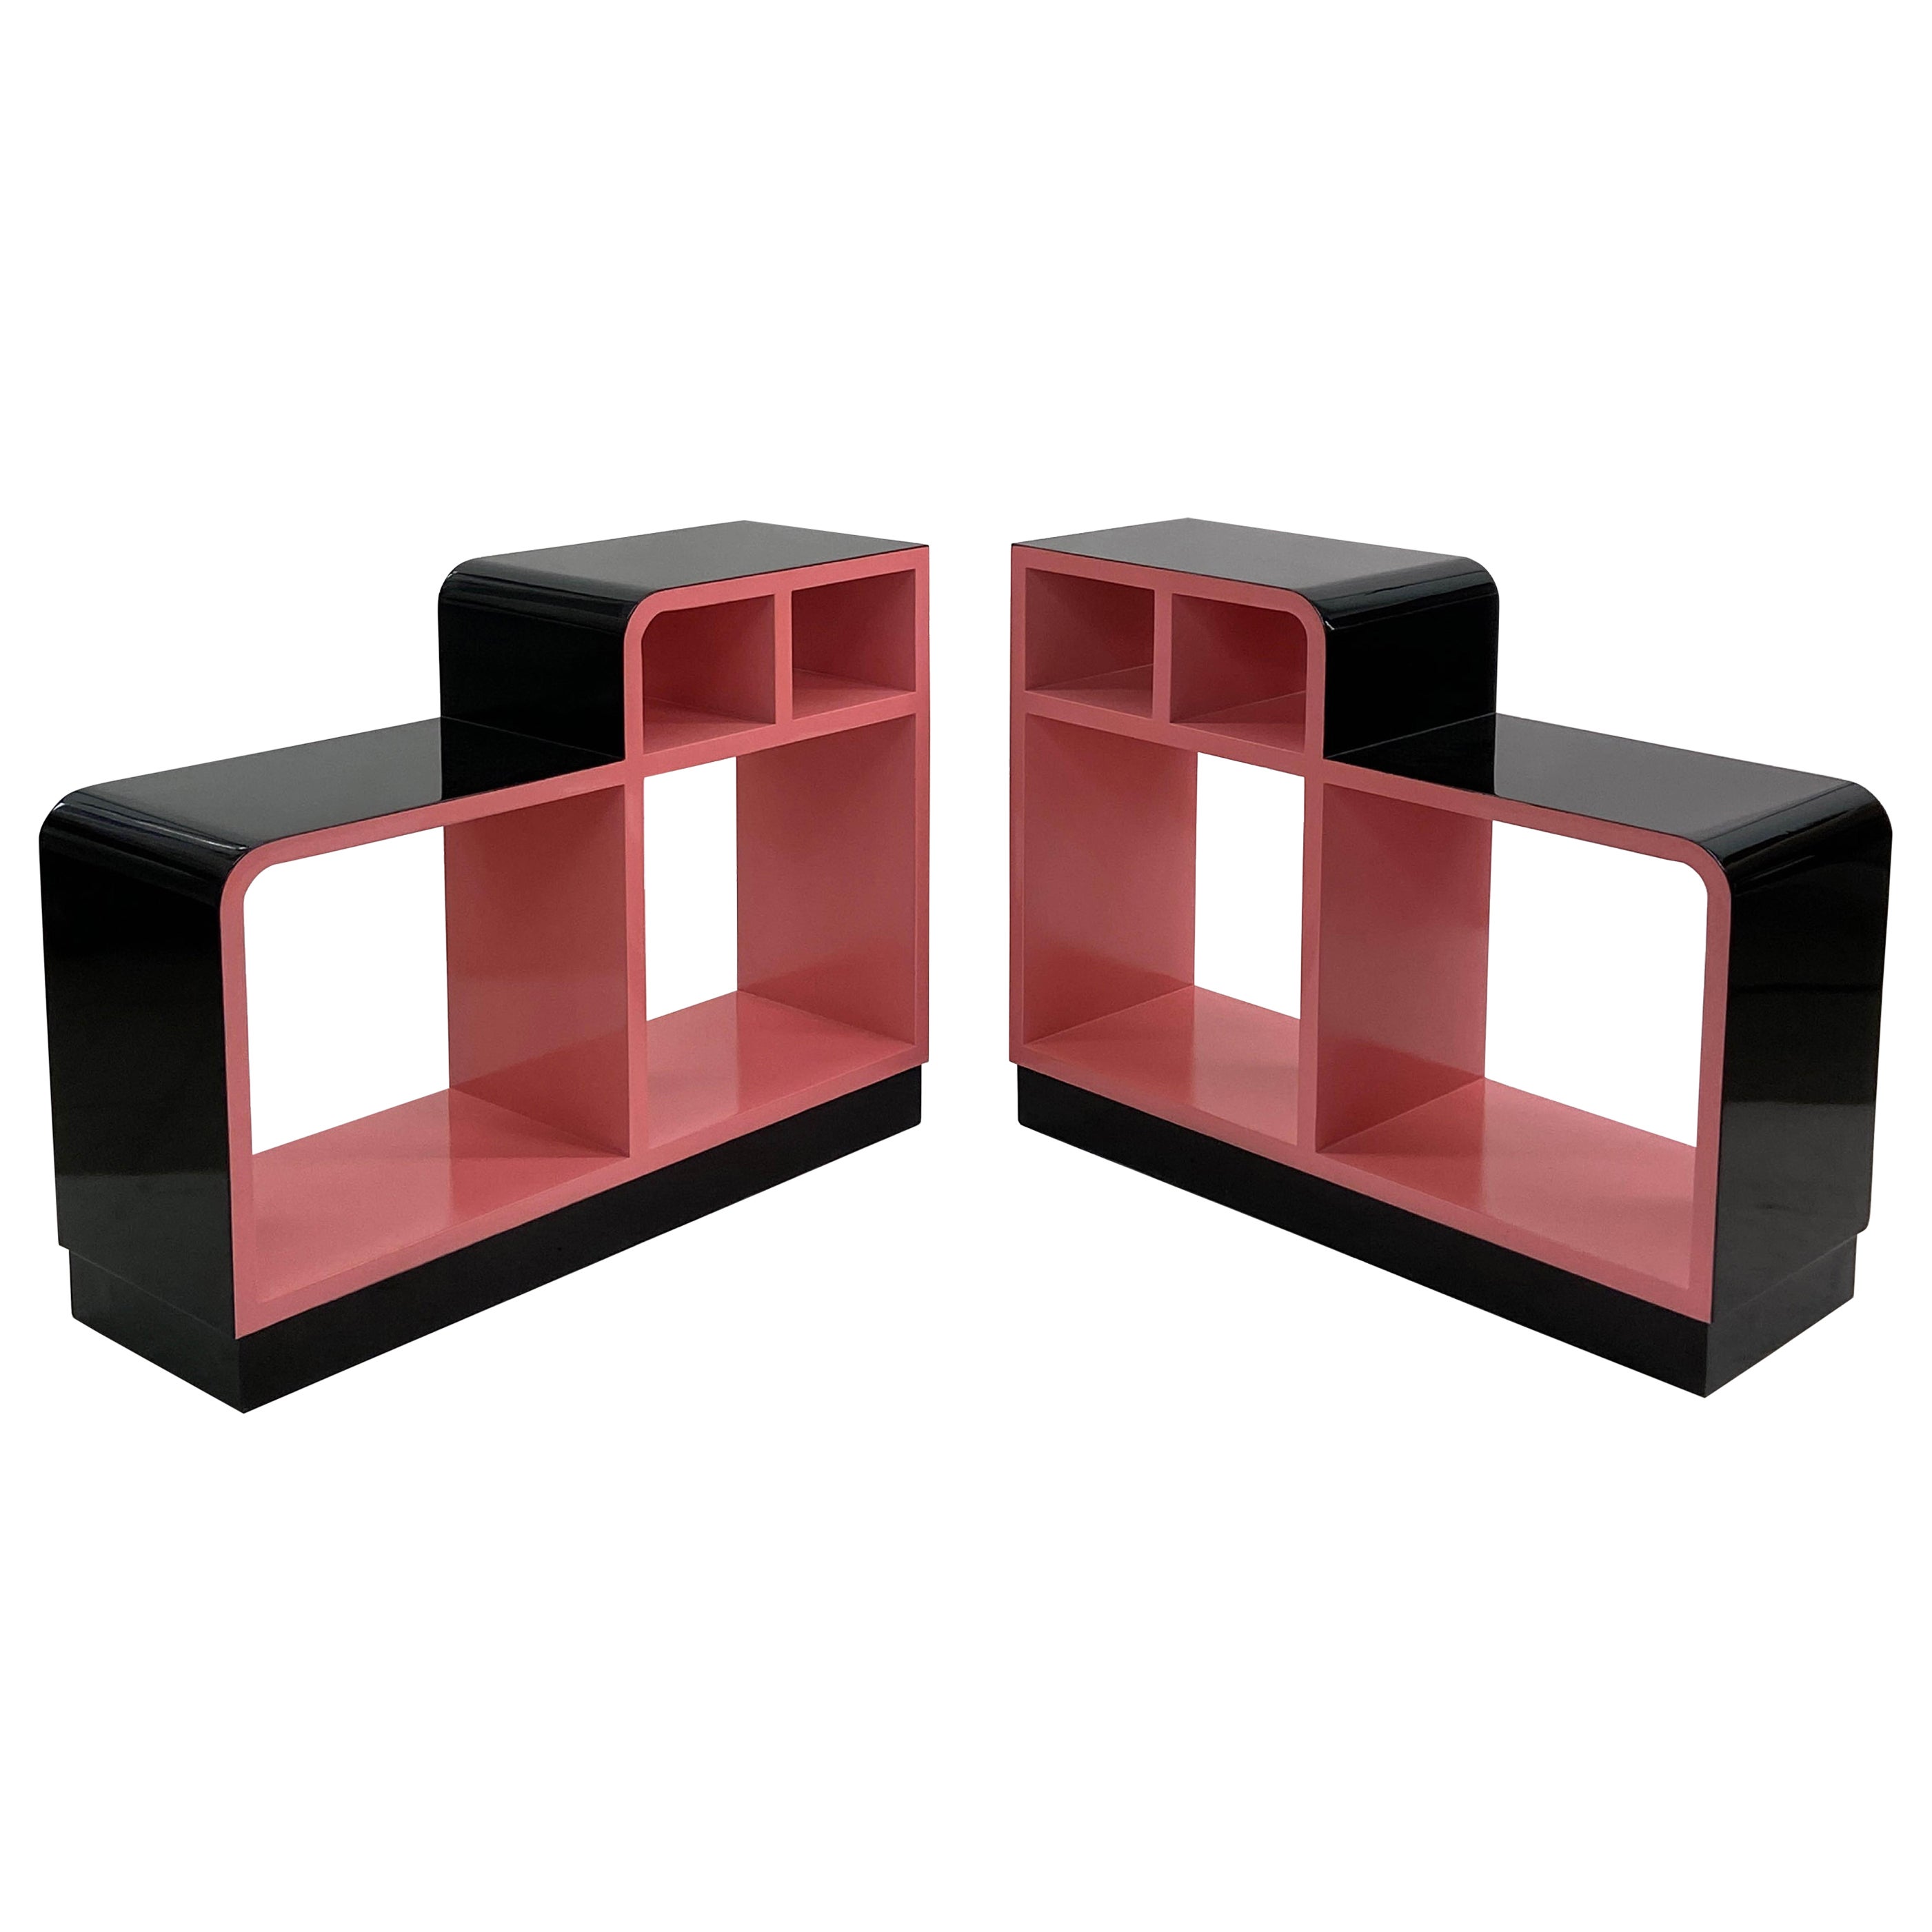 Stepped Art Deco Stands Lacquered in Black and Pink 